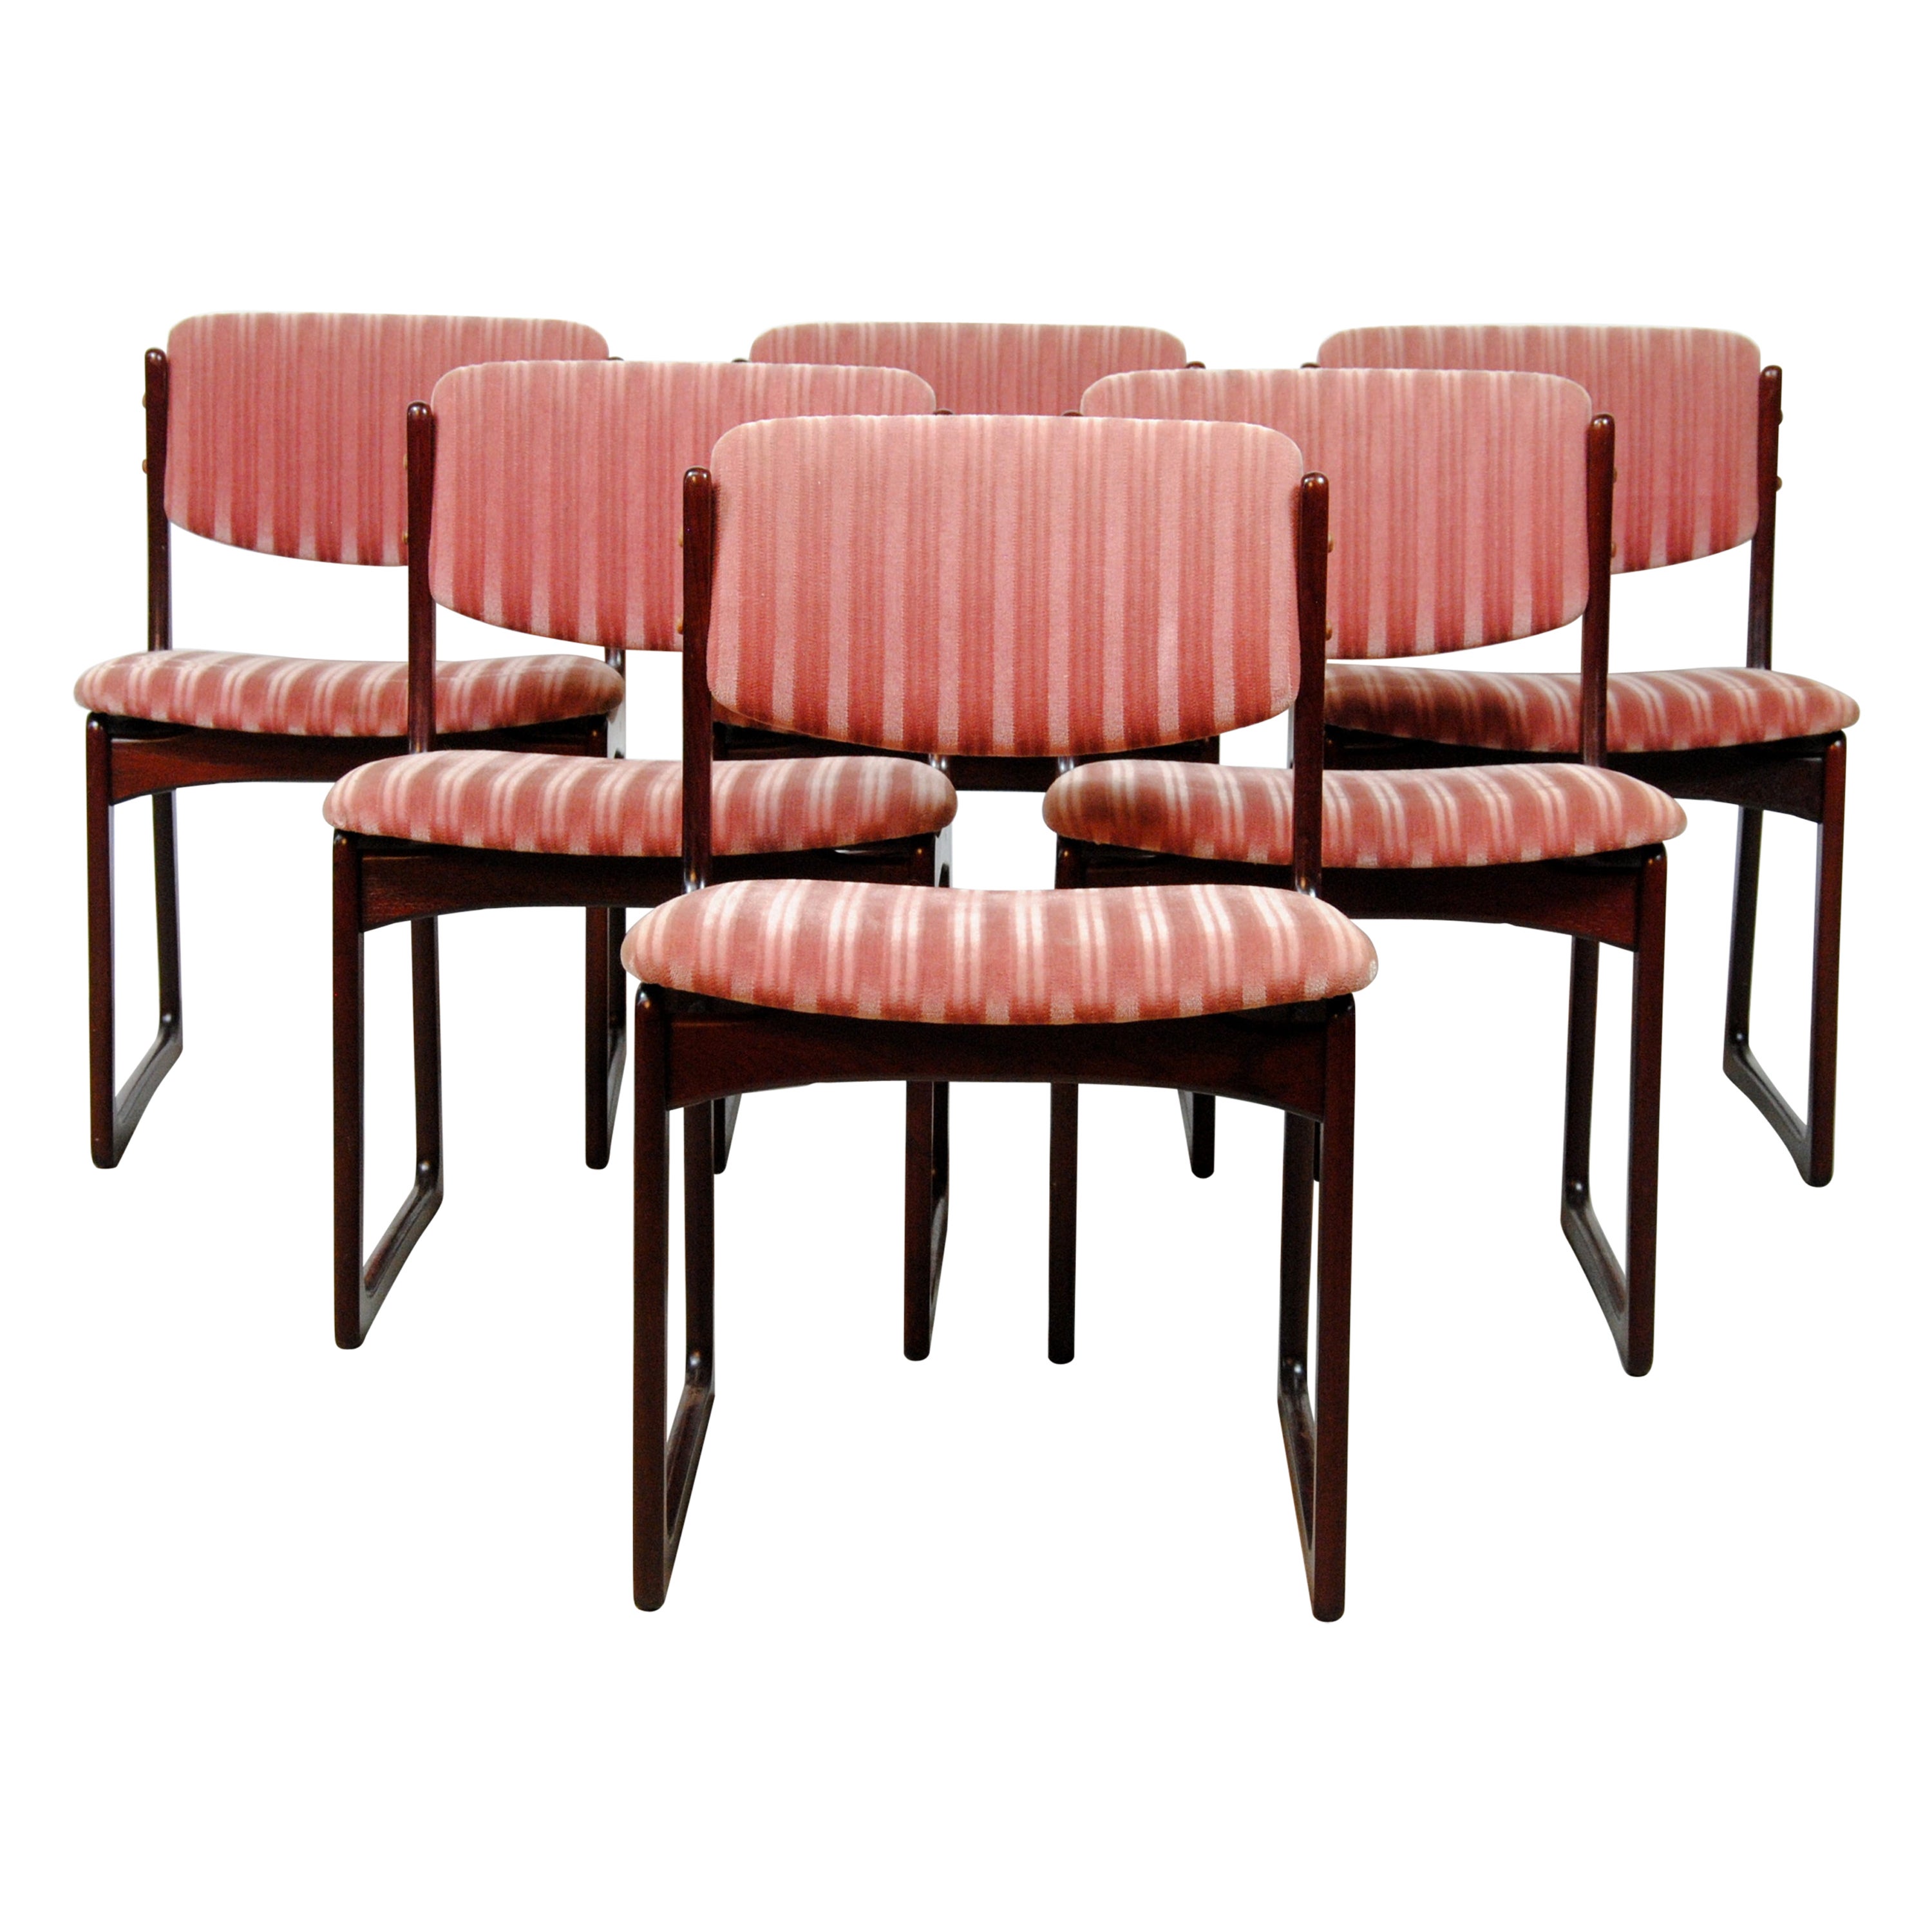 1970's Poul Hundevad Six Danish Dining Chairs in Tanned Oak and Pink Upholstery For Sale